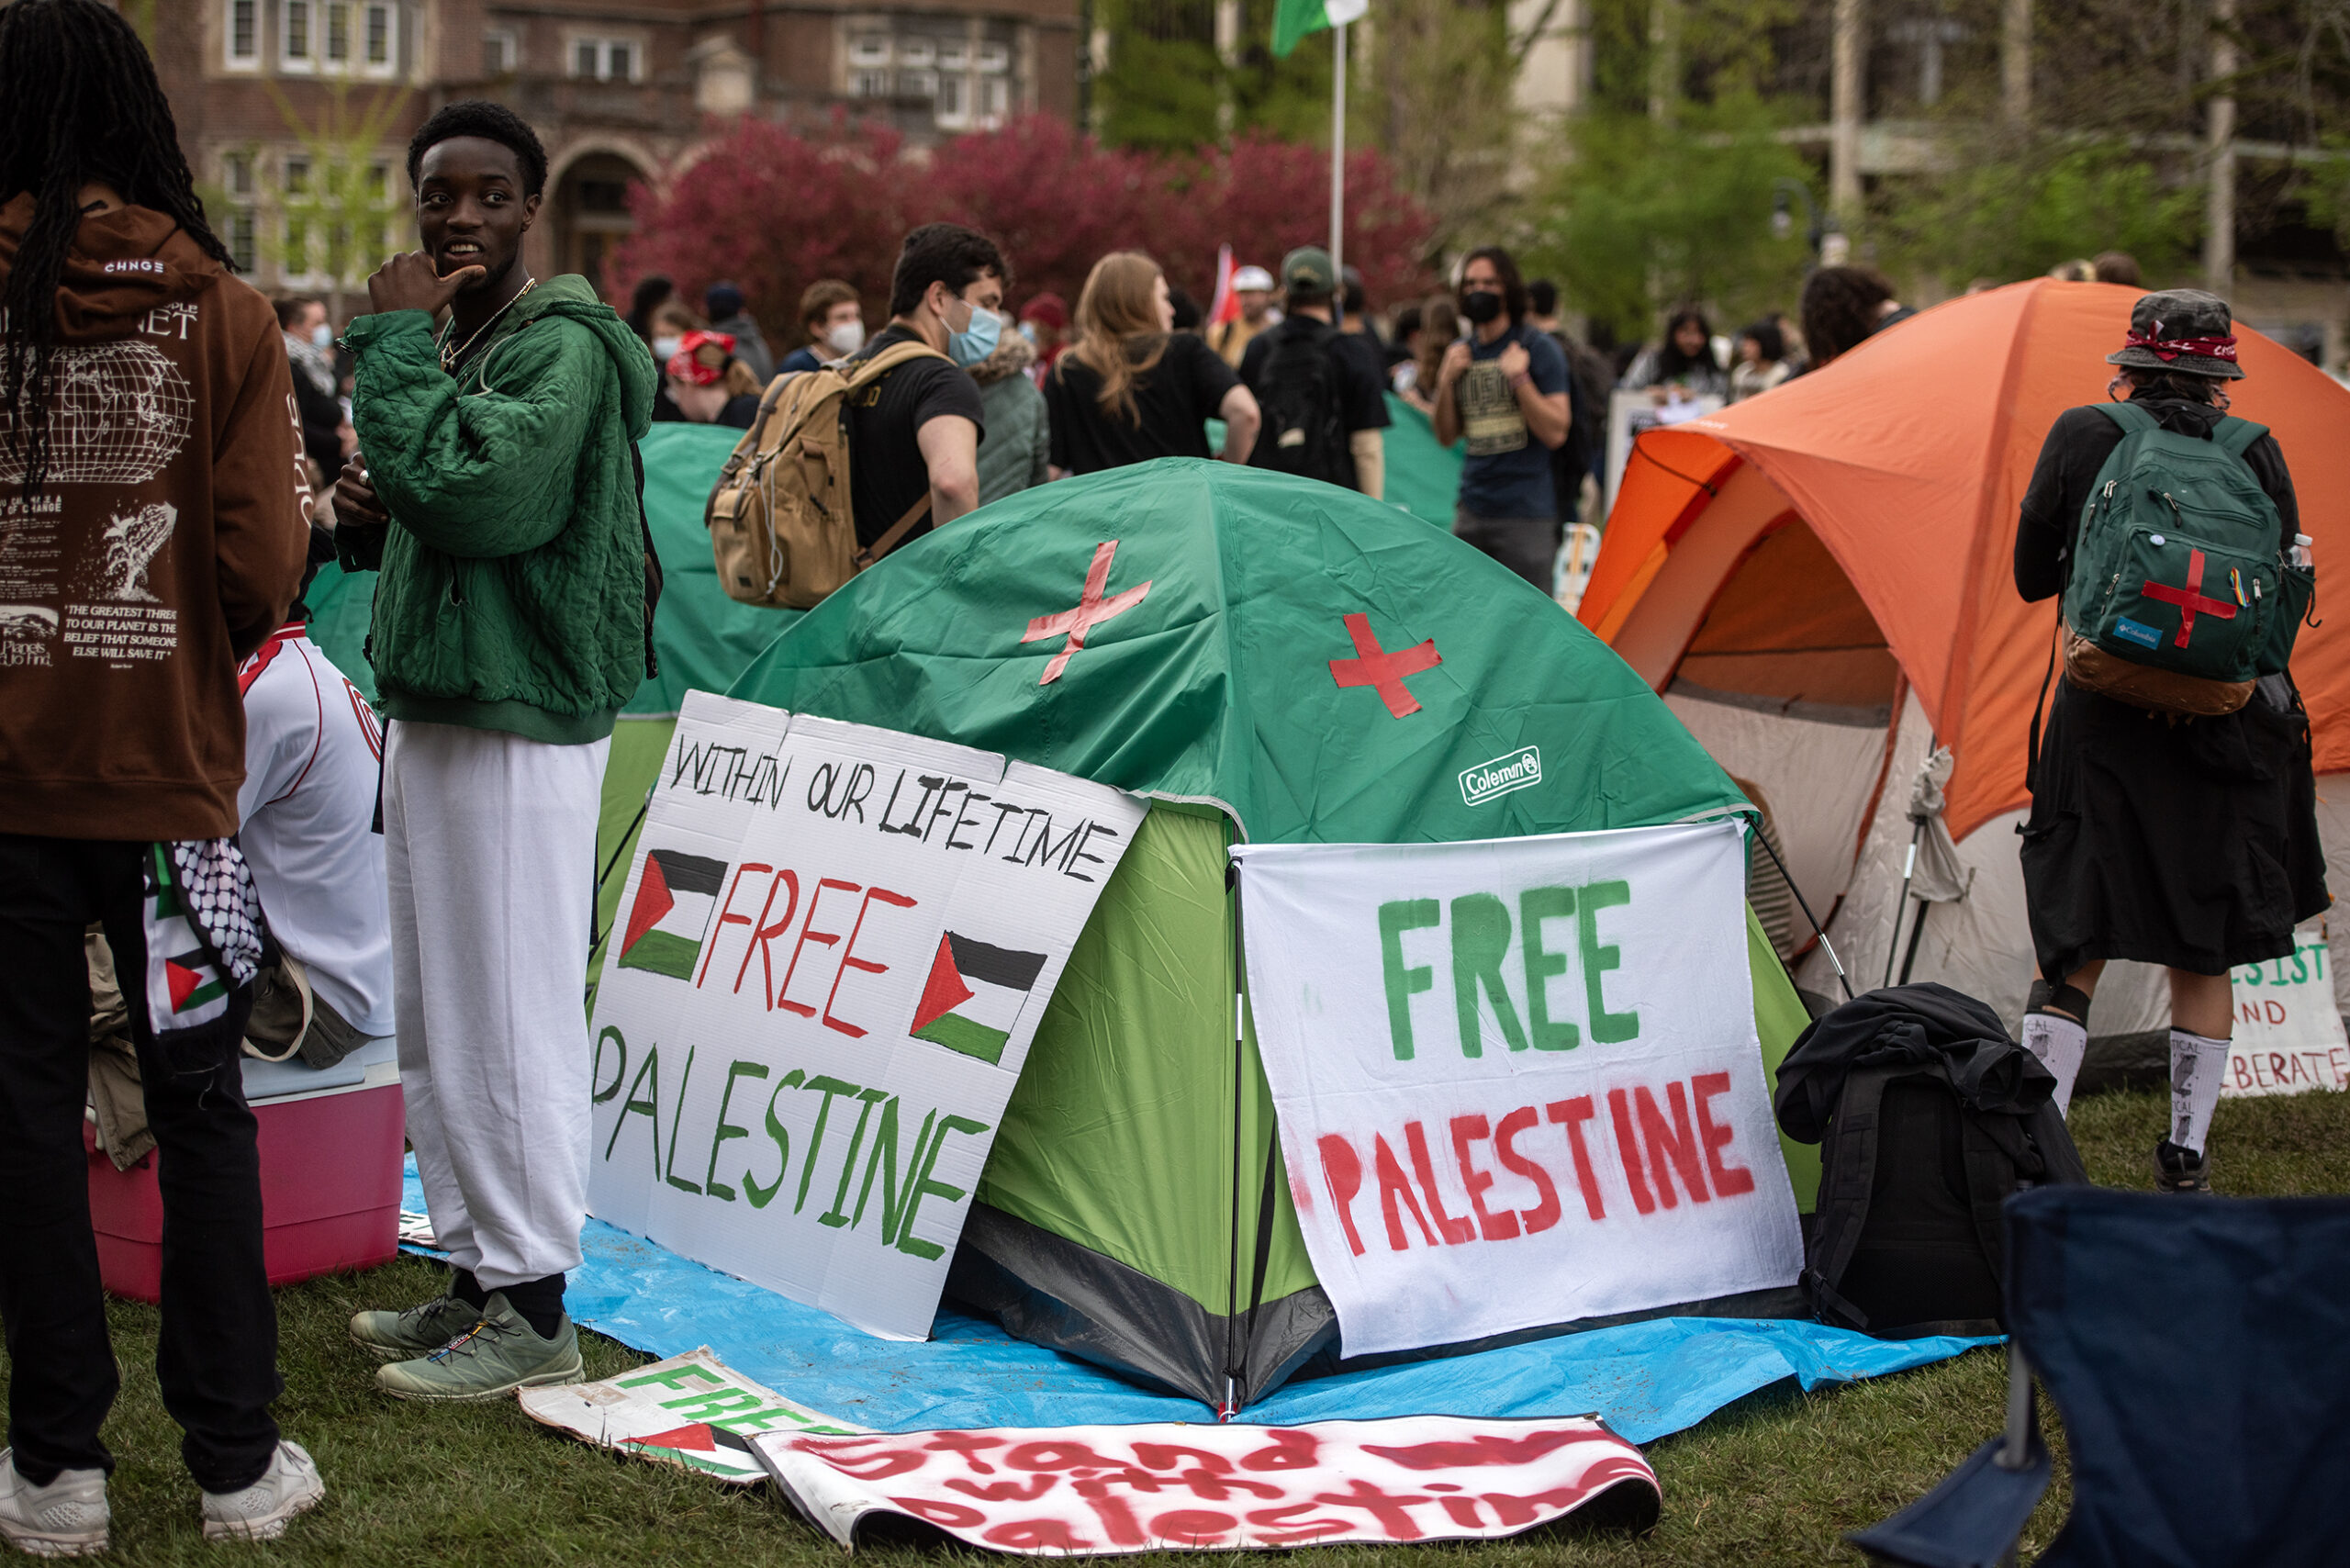 Signs that say "Free Palestine" are displayed outside of a tent.